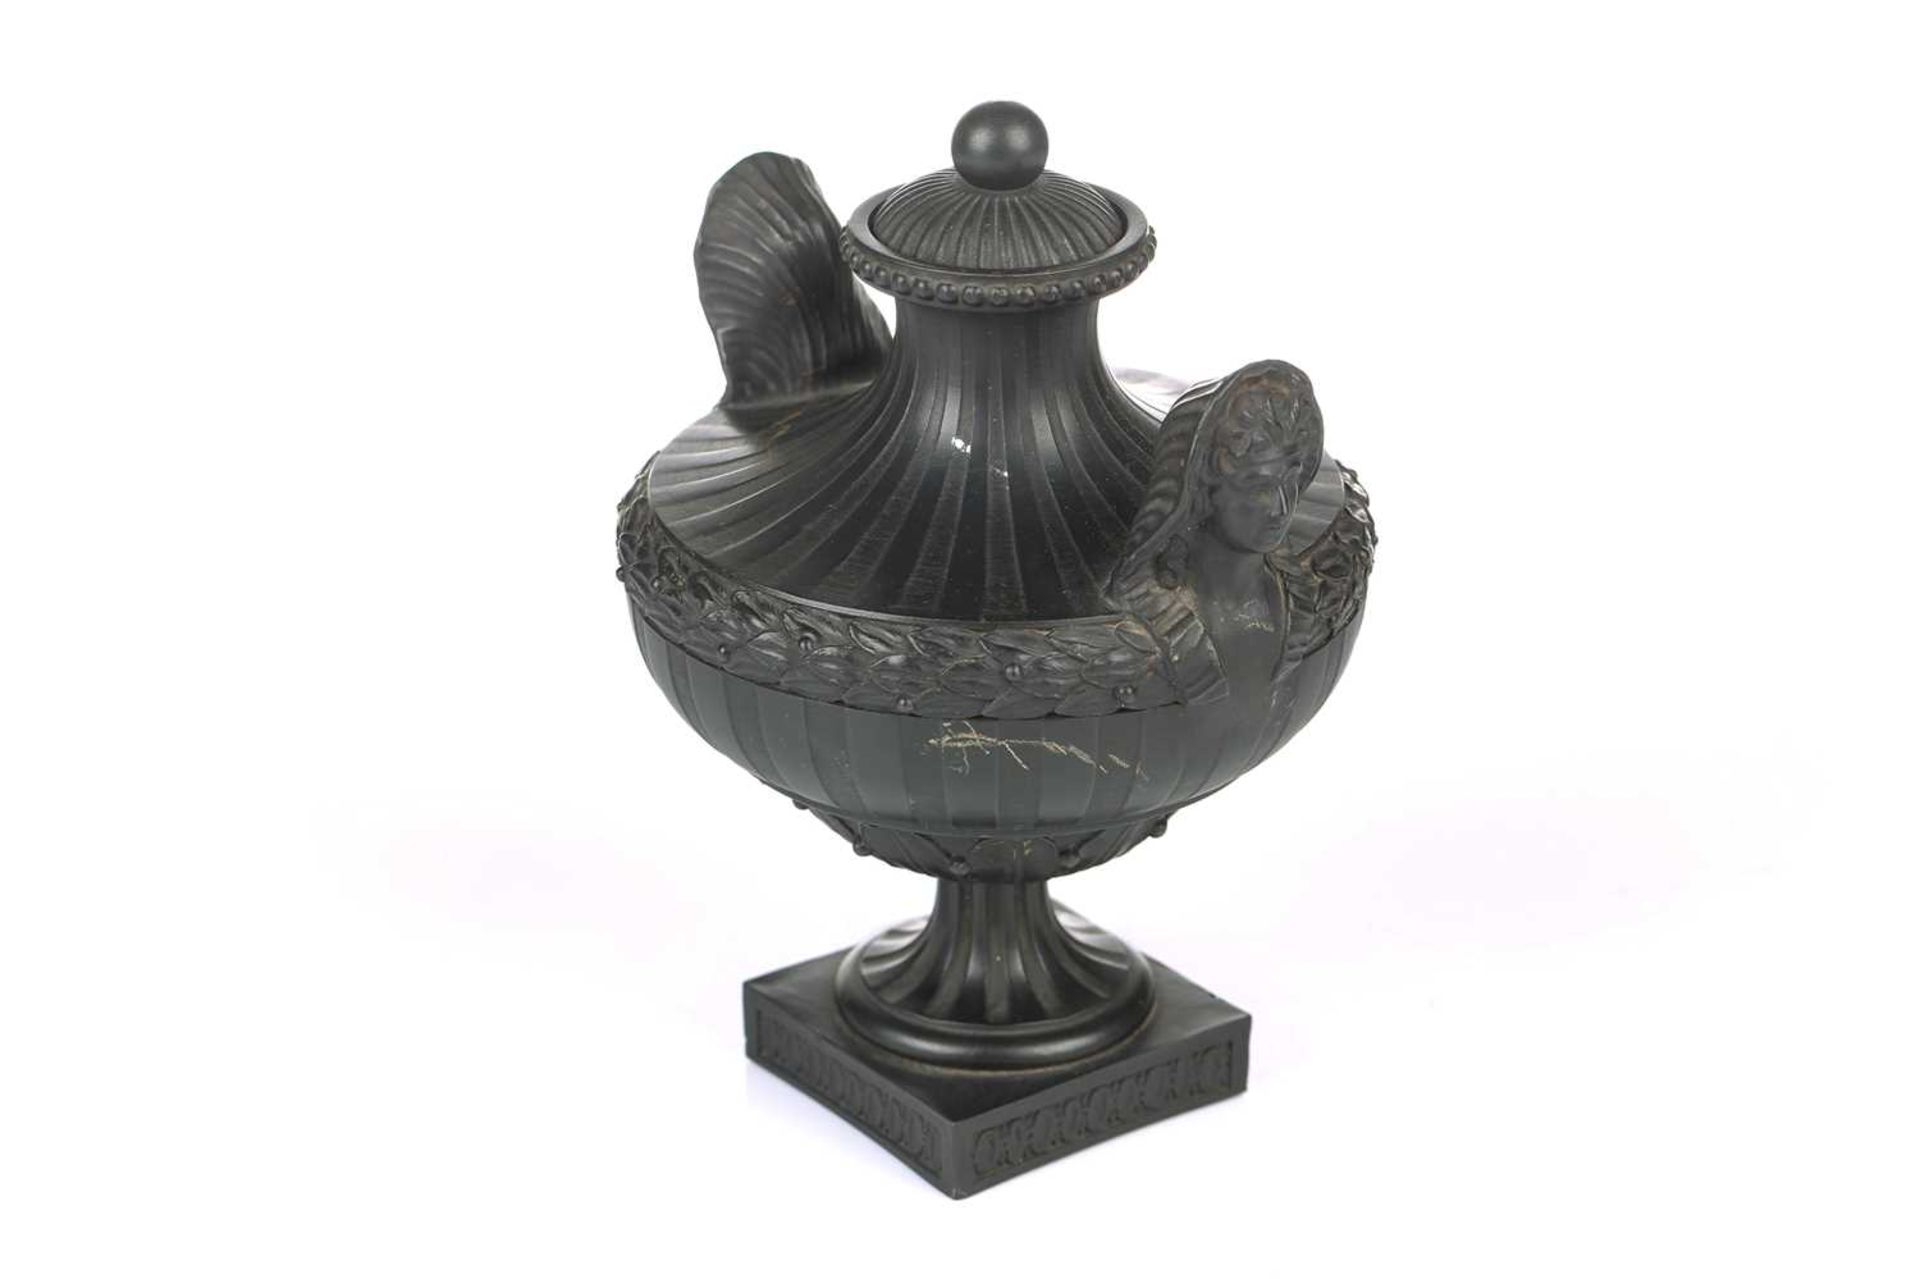 Wedgwood & Bentley, Etruria: a late 18th century black basalt urn and cover, of Classical form - Image 2 of 15